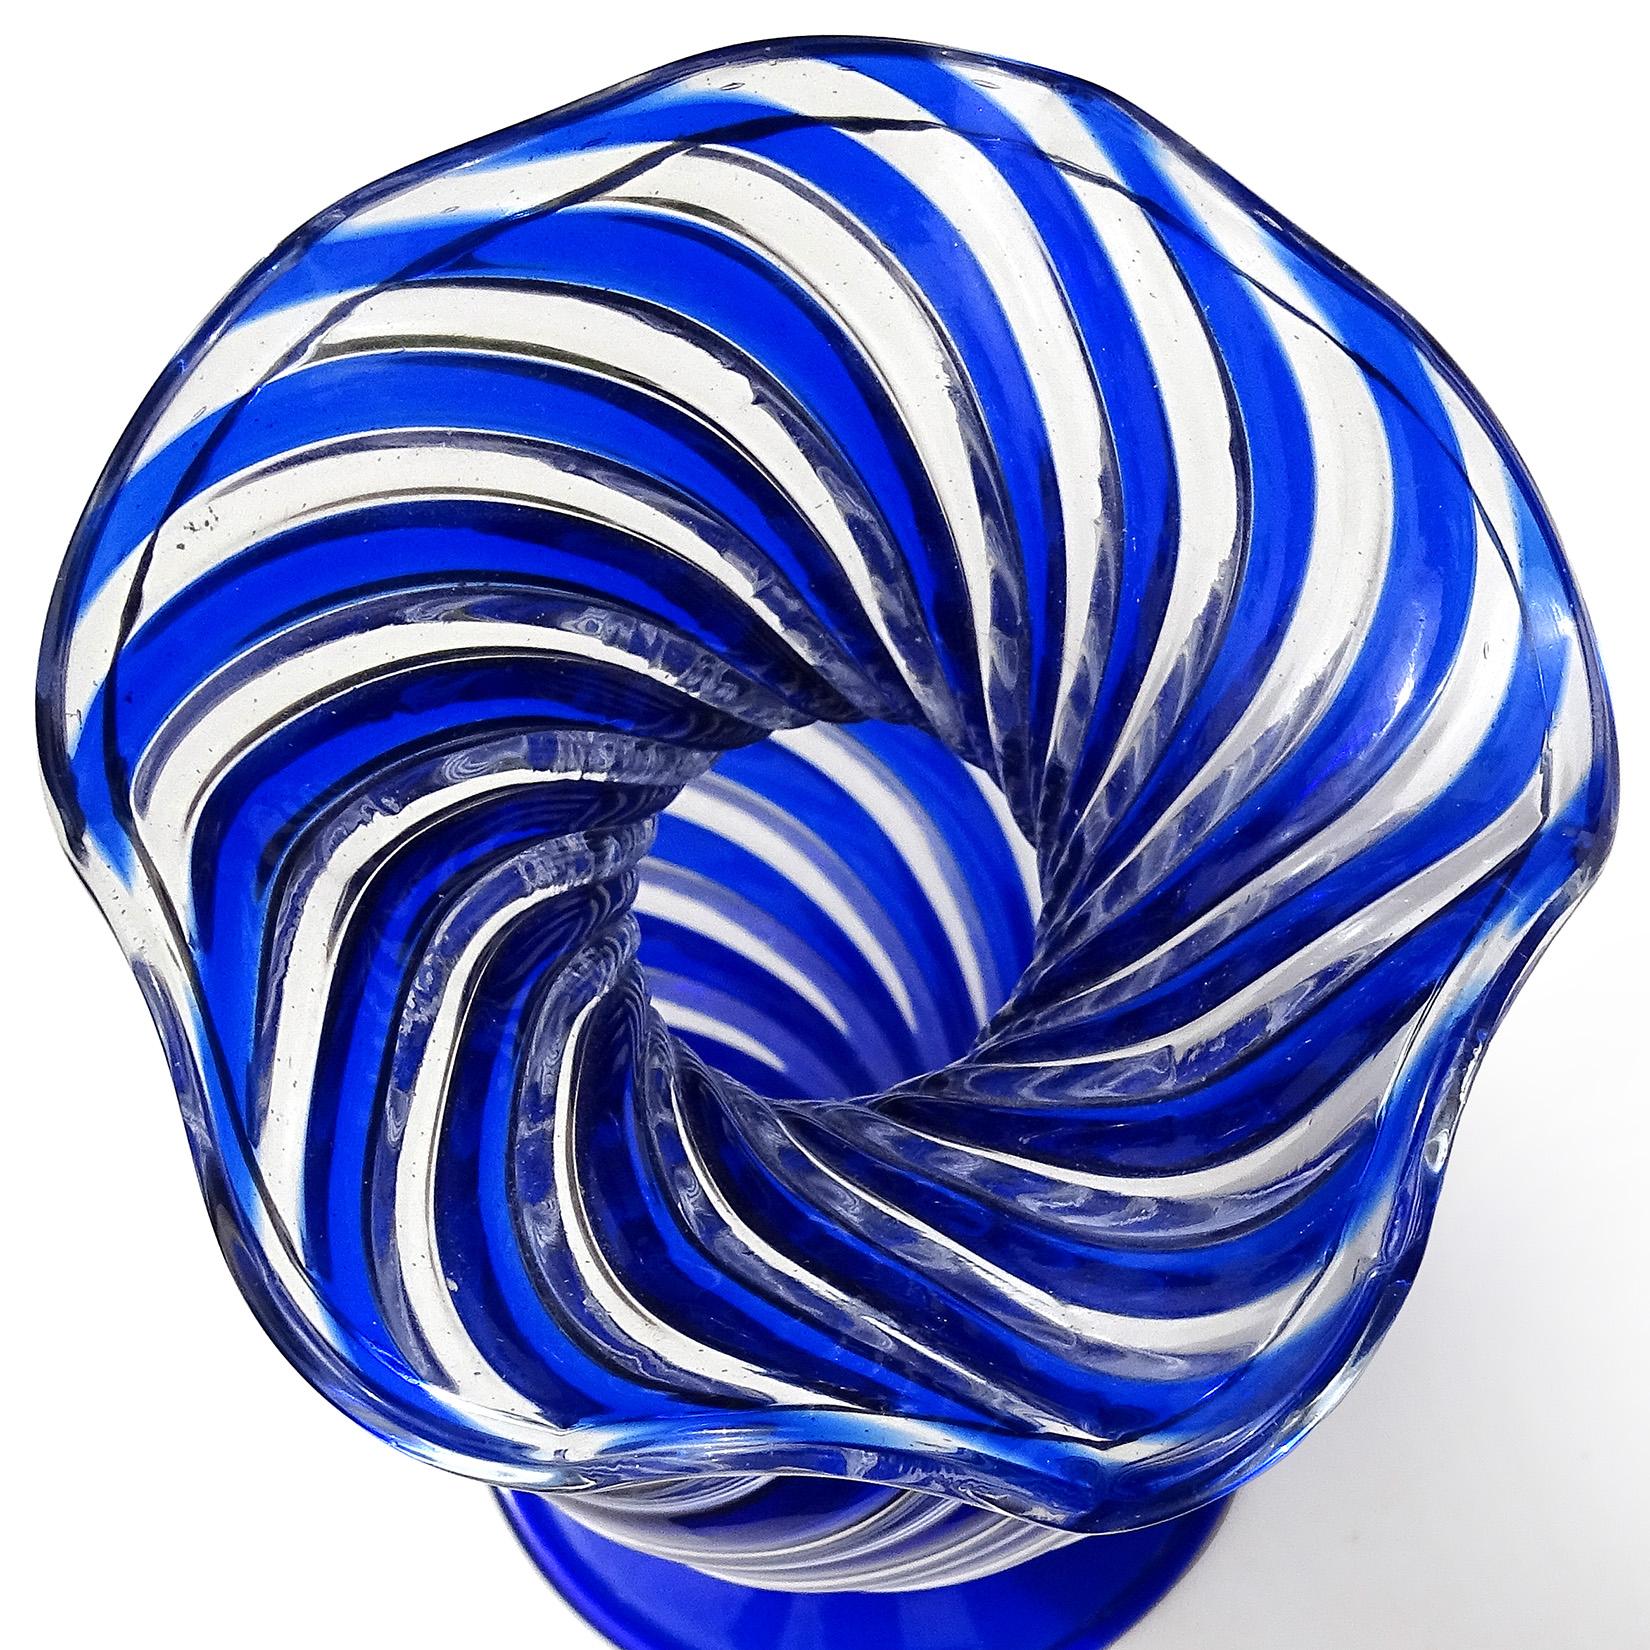 Beautiful vintage Murano hand blown swirling cobalt blue and clear Italian art glass flower vase. Documented to Arte Vetraria Muranese (A.Ve.M.). Created in the “A Canne” technique. It has a ruffled rim, and applied large foot. Would make a great